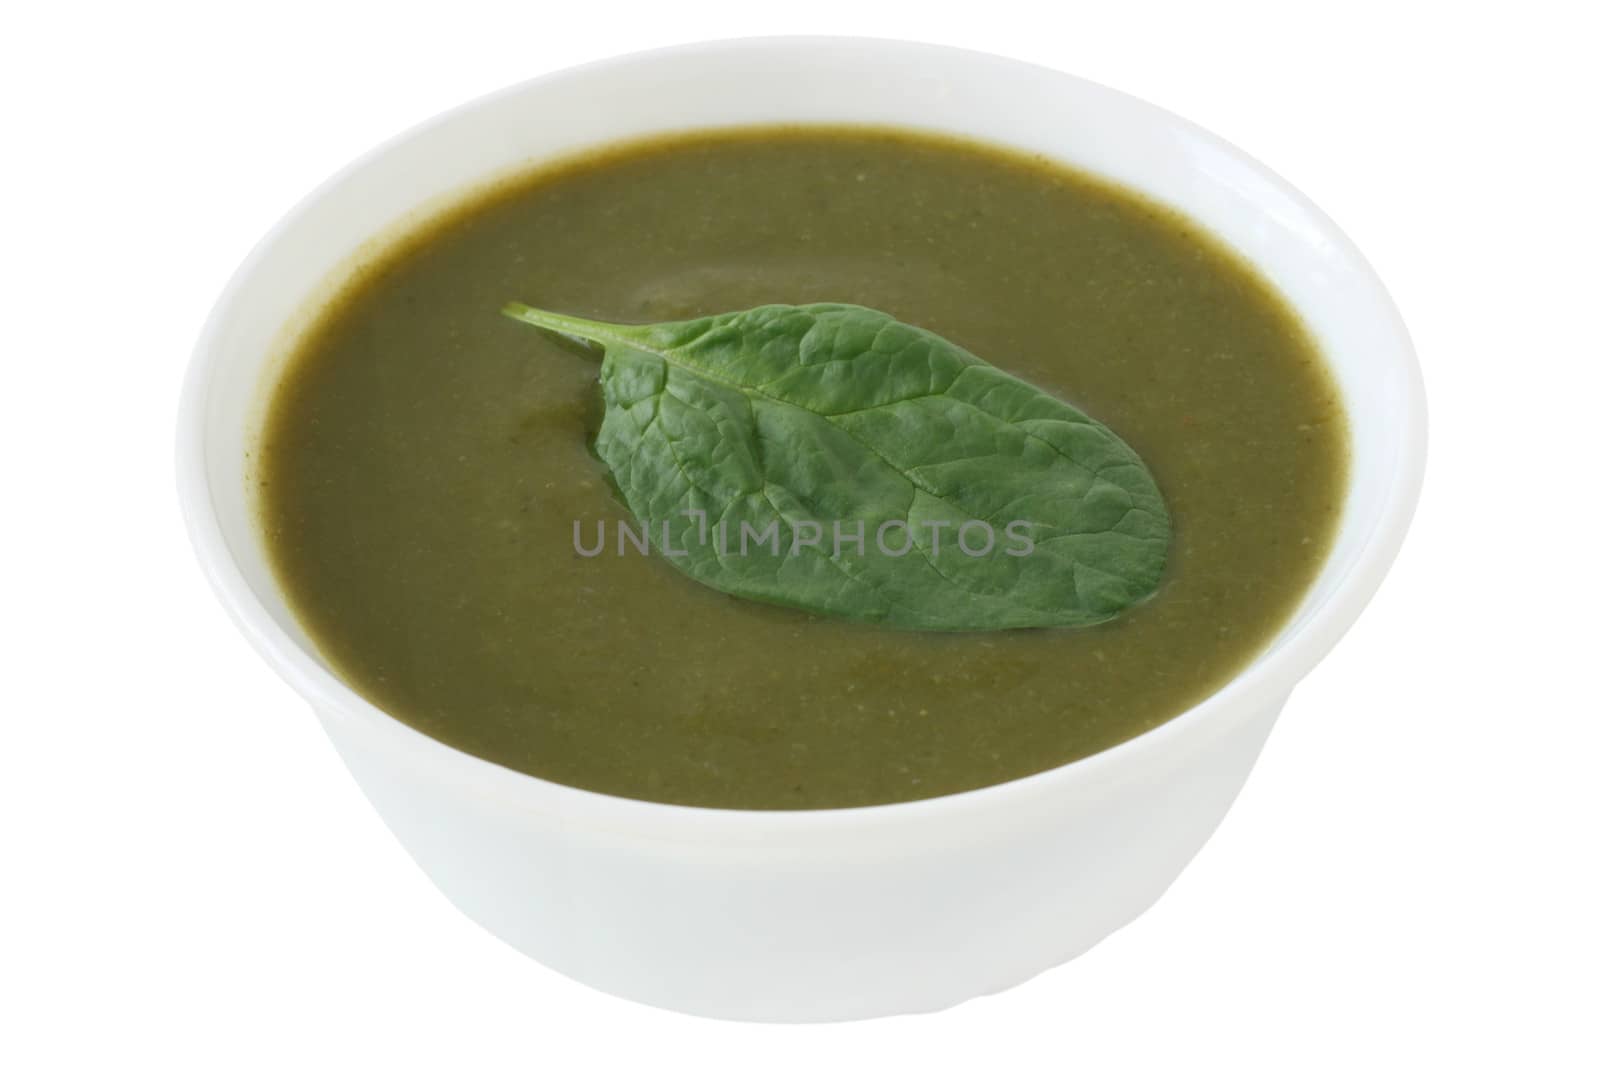 spinach soup in the white bowl